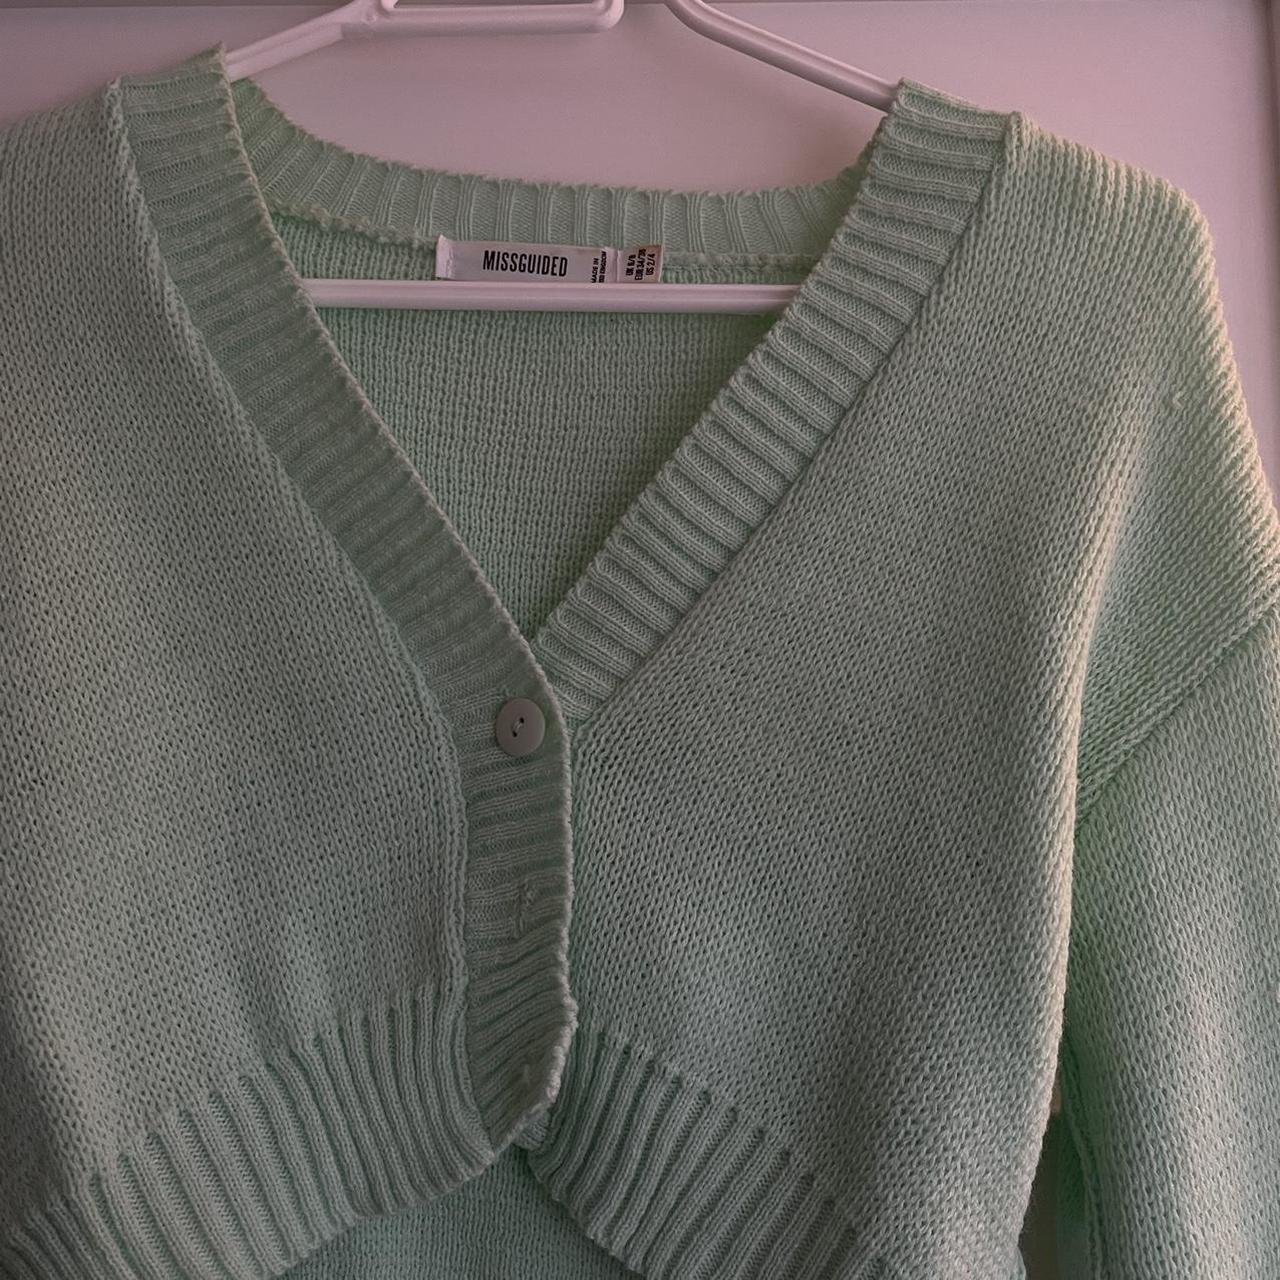 Mint green cropped cardigan with buttons, misguided,... - Depop